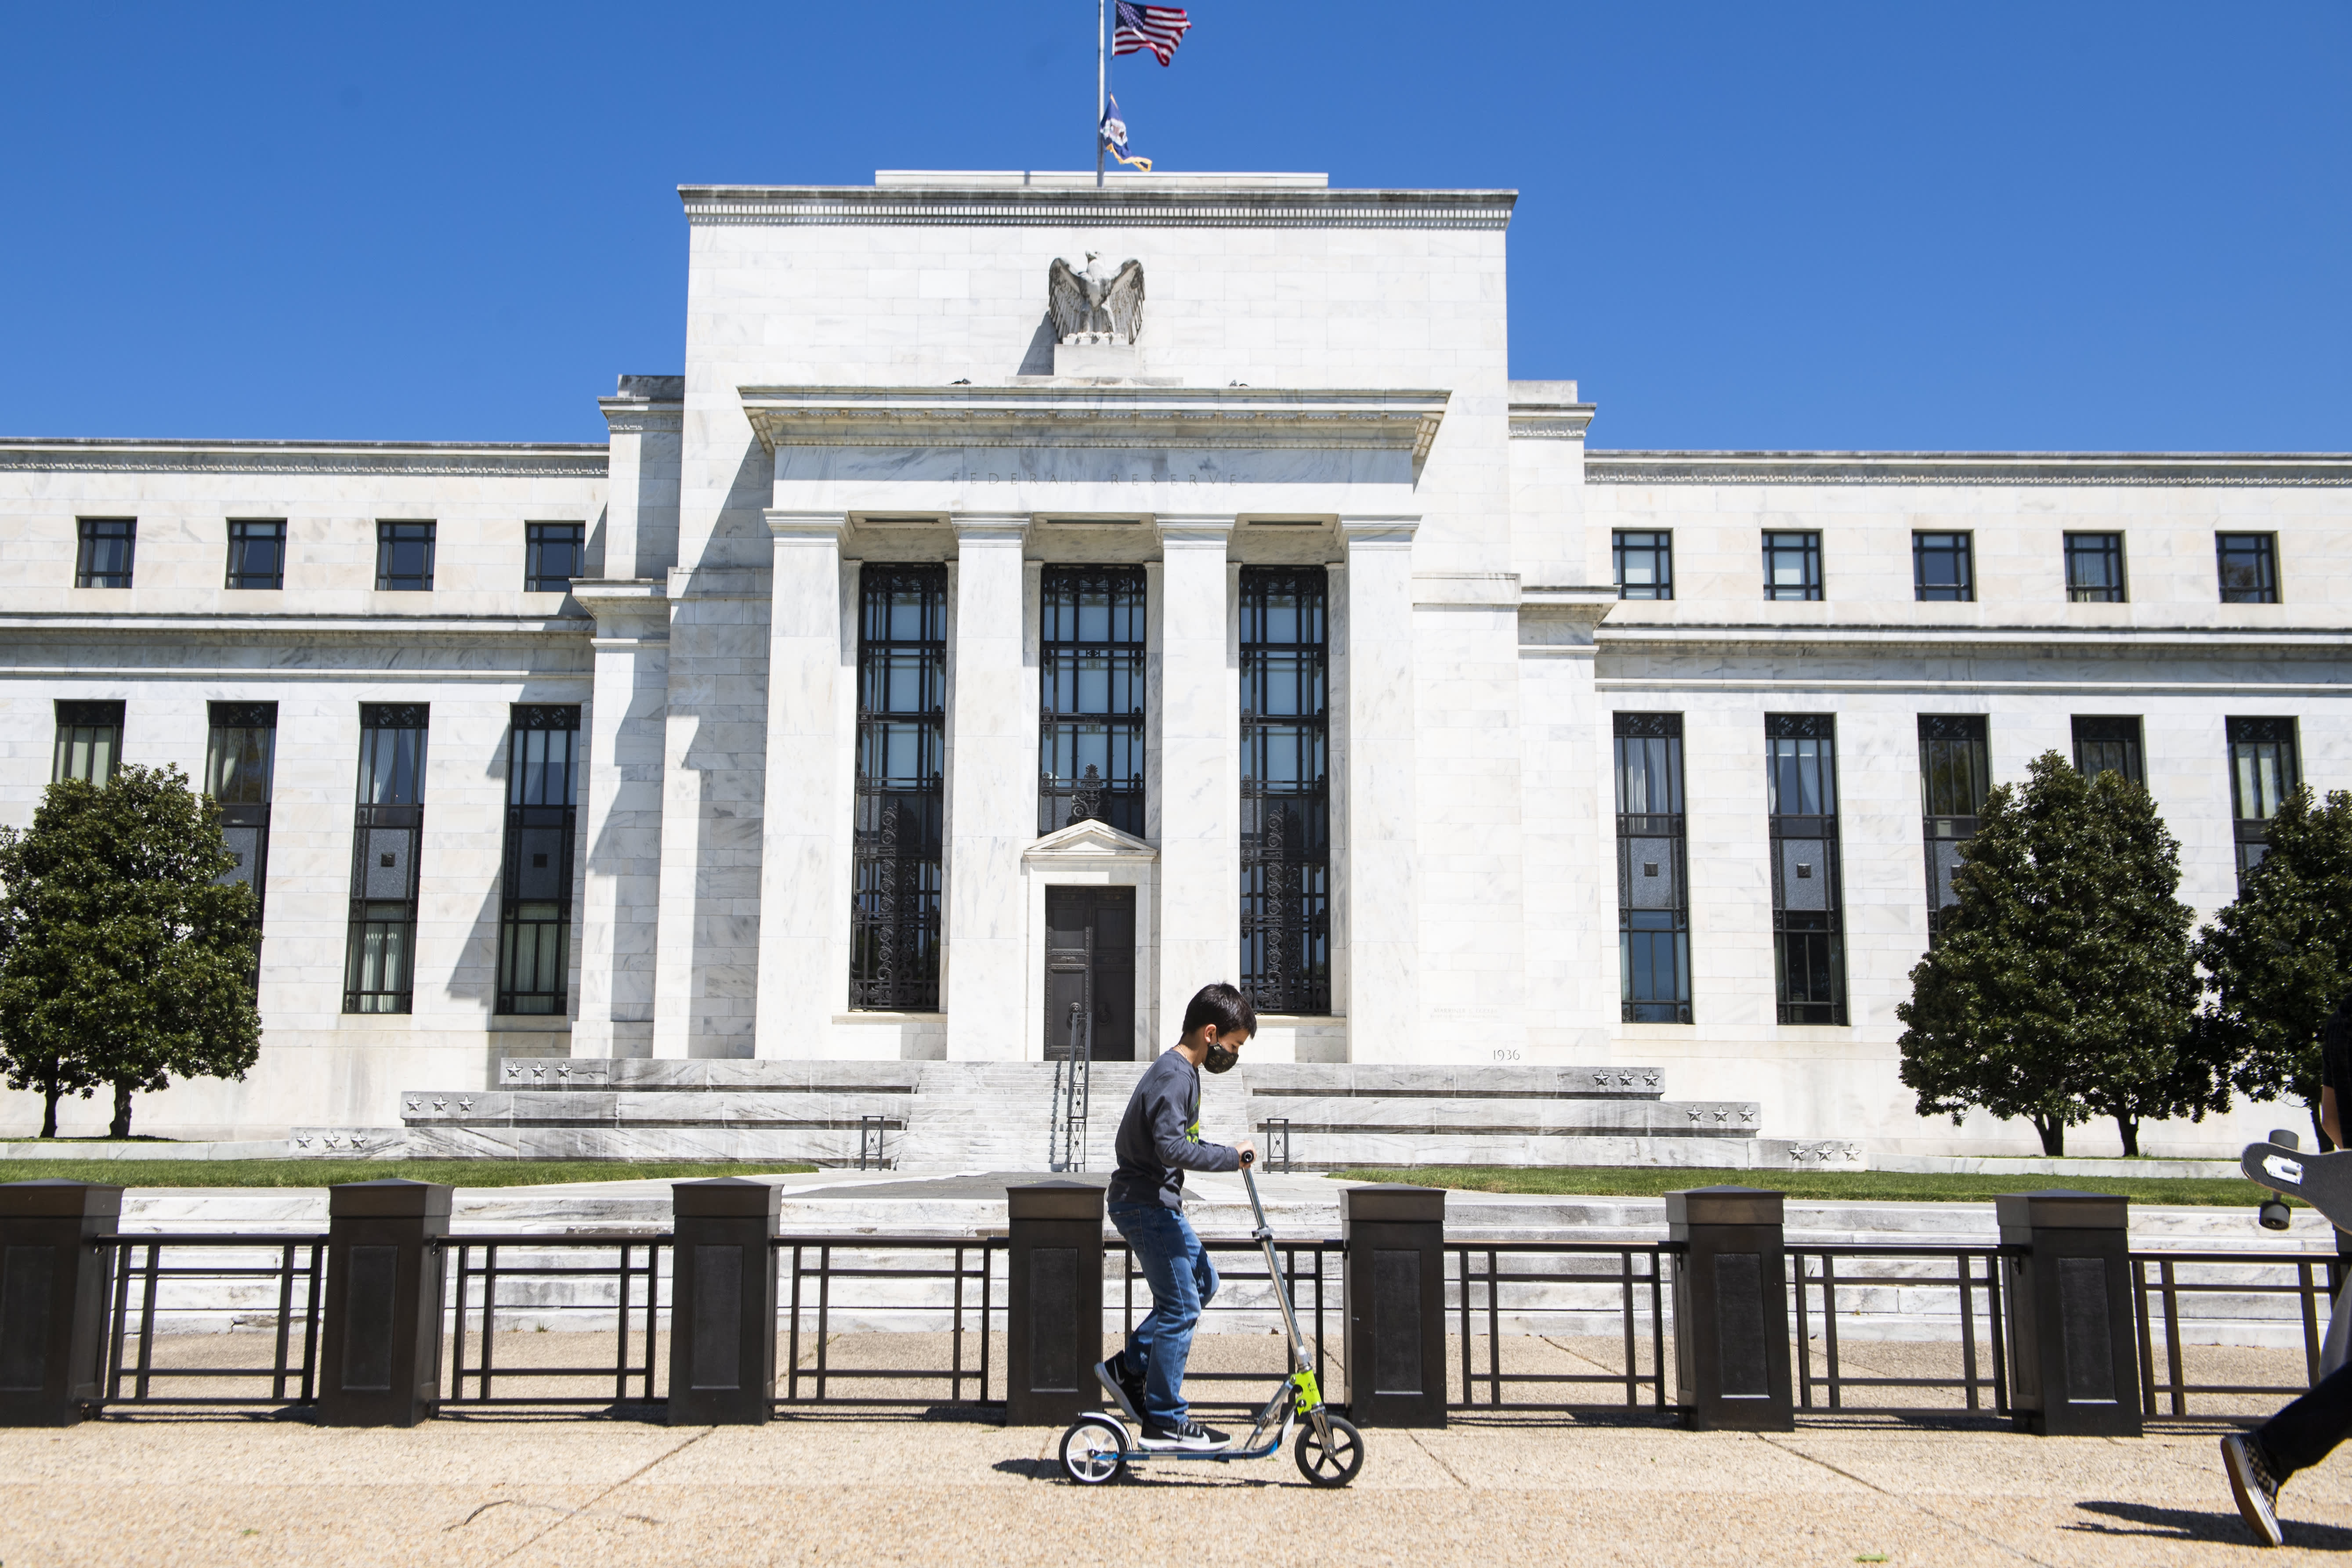 The majority of Fed members forecast three interest rate hikes in 2022 to fight inflation